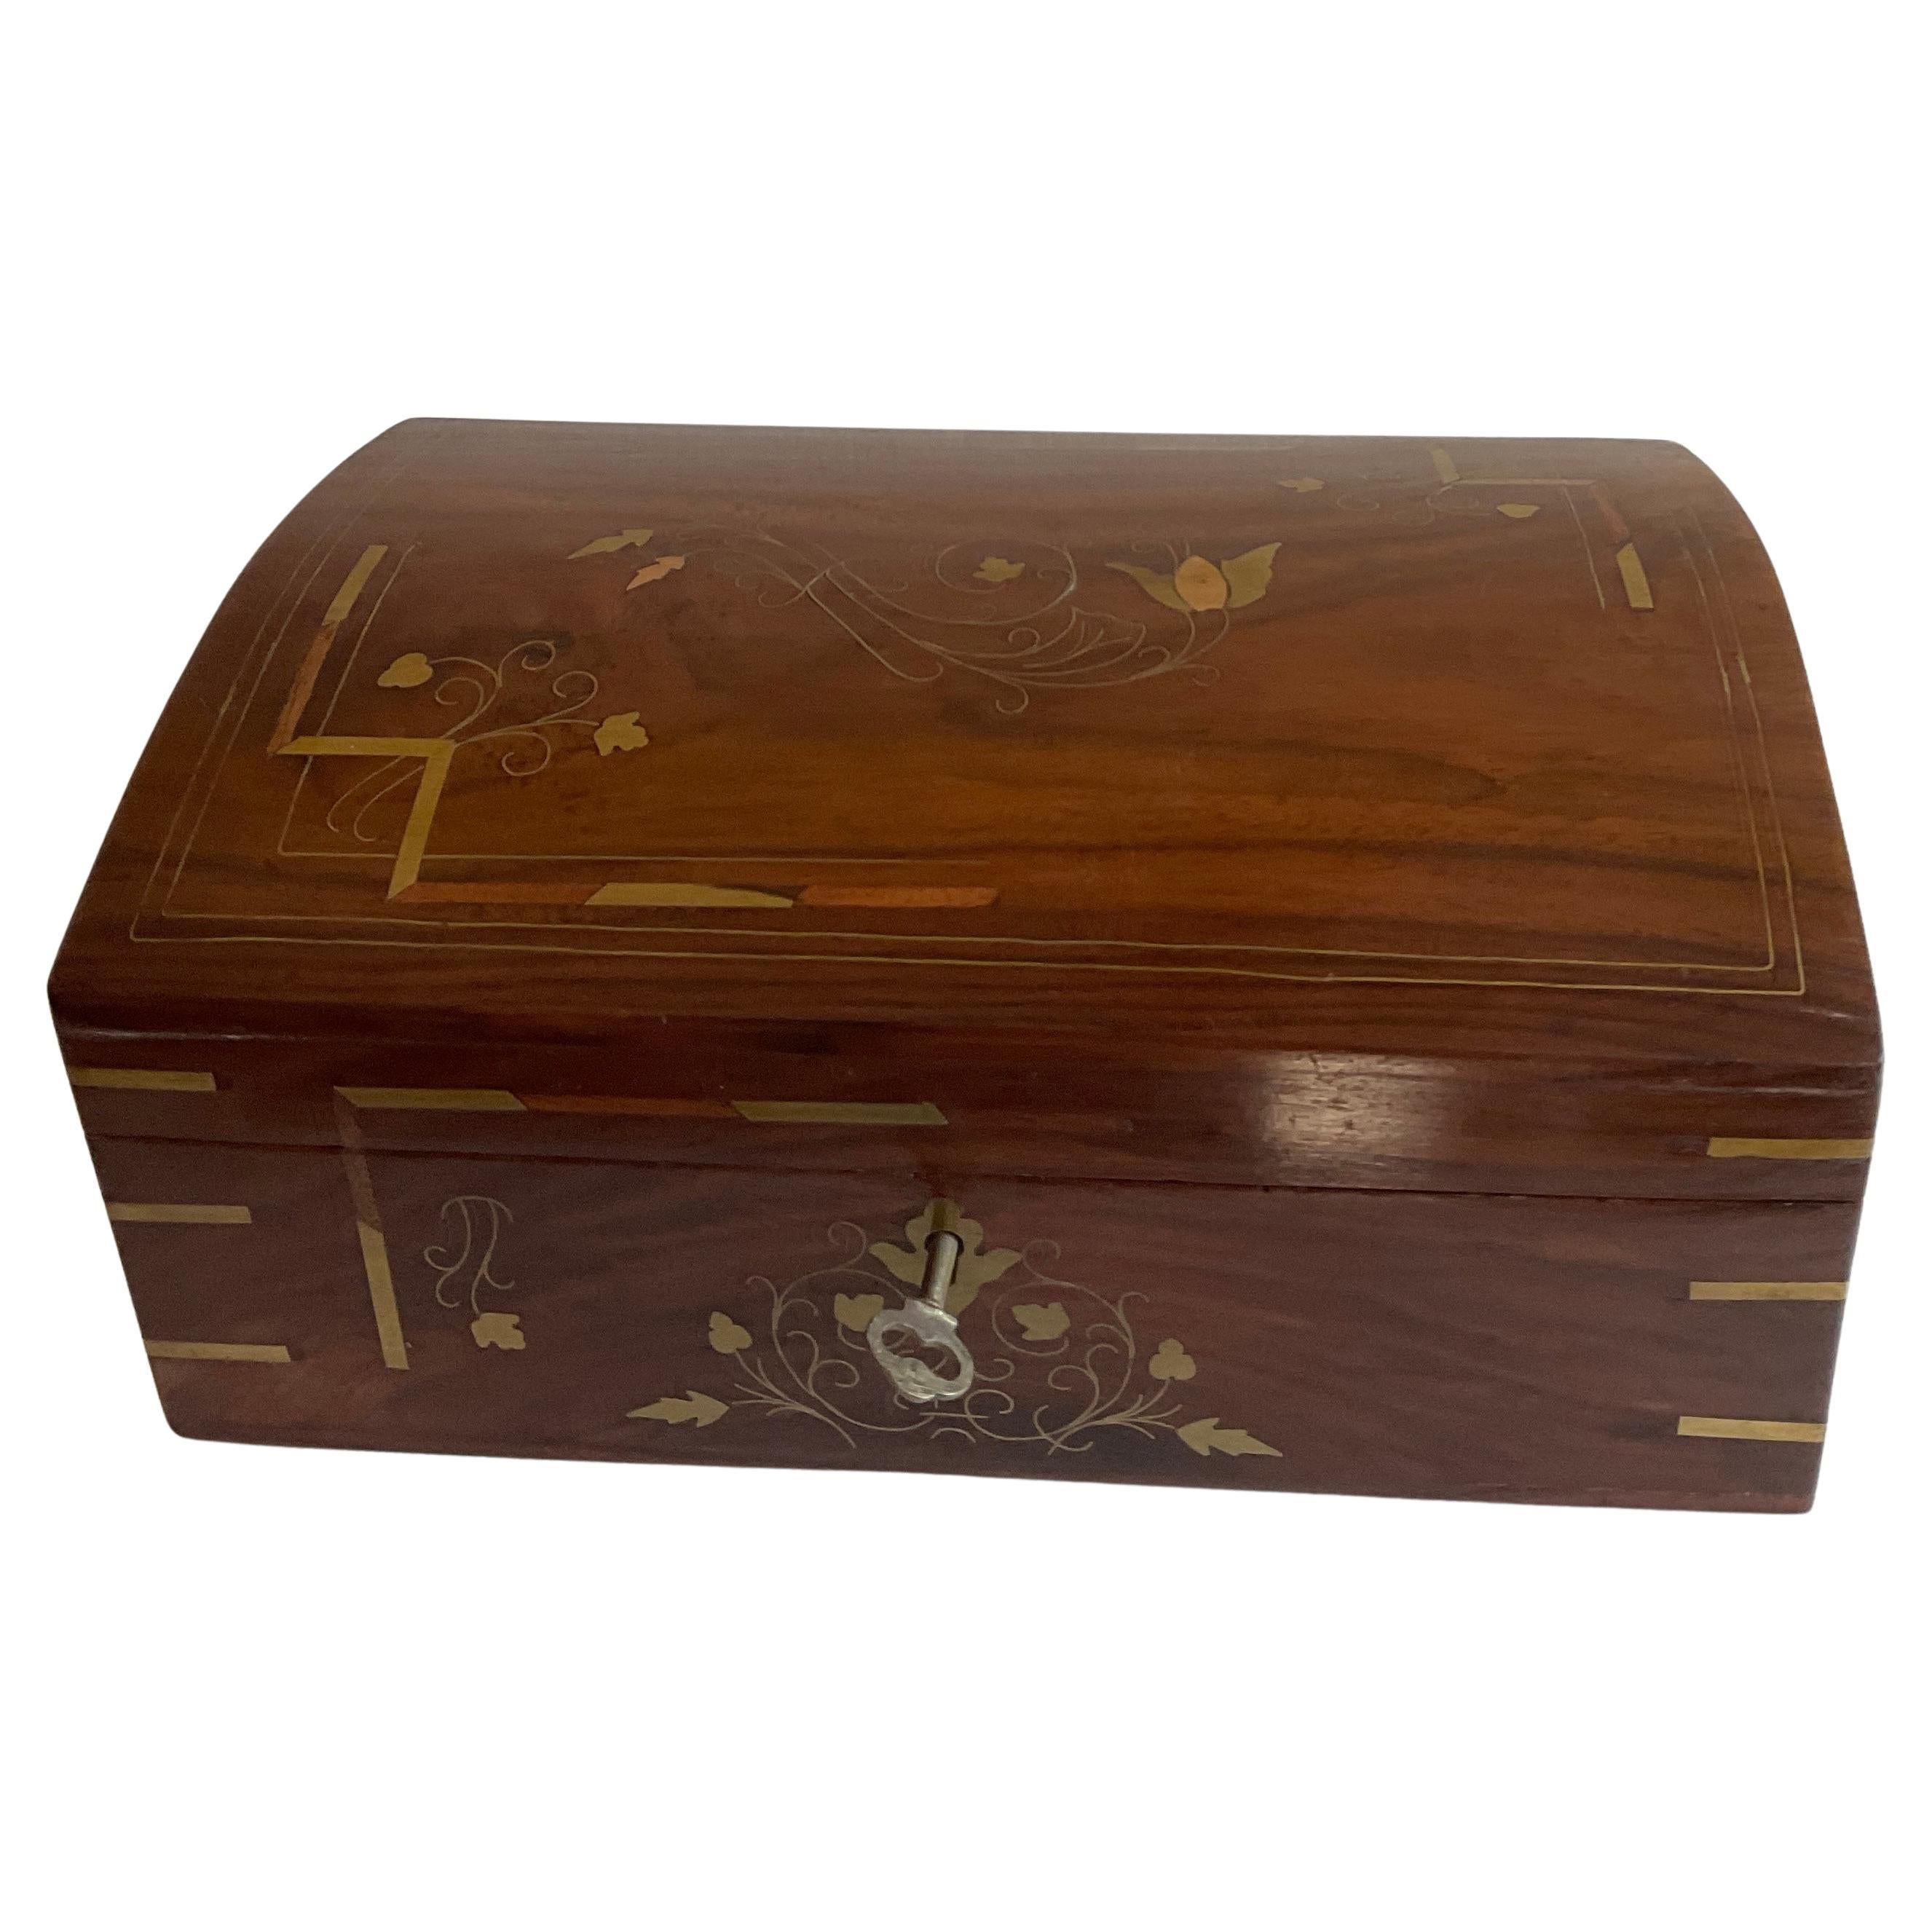 Large French Art Deco Wooden Jewelry Box with Marquetry Inlay